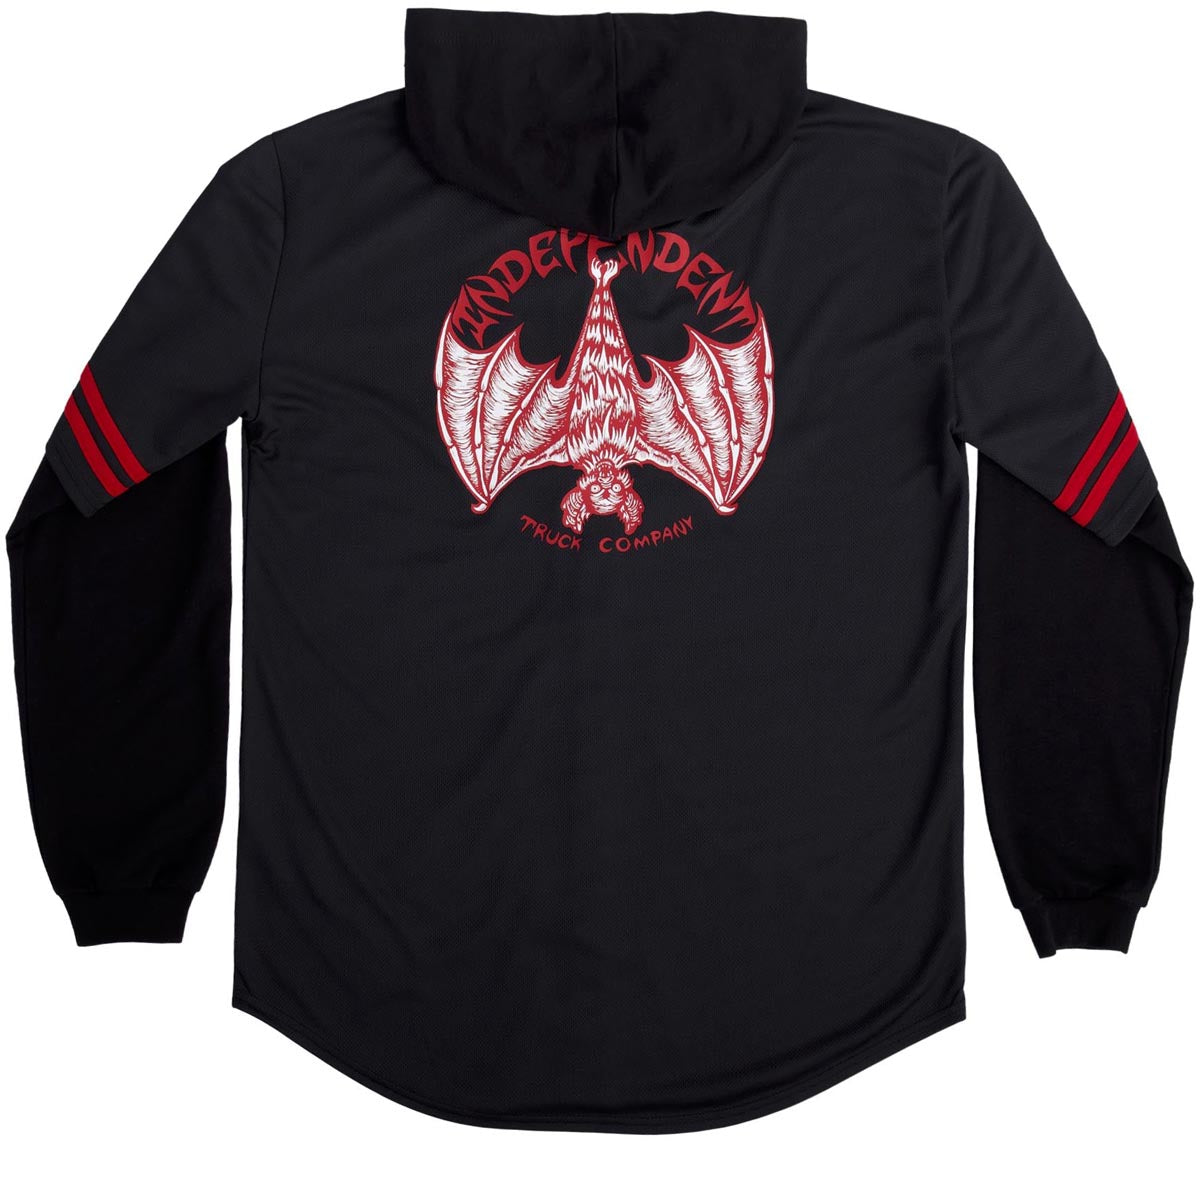 Independent Night Prowlers Long Sleeve Hooded Jersey - Black image 2